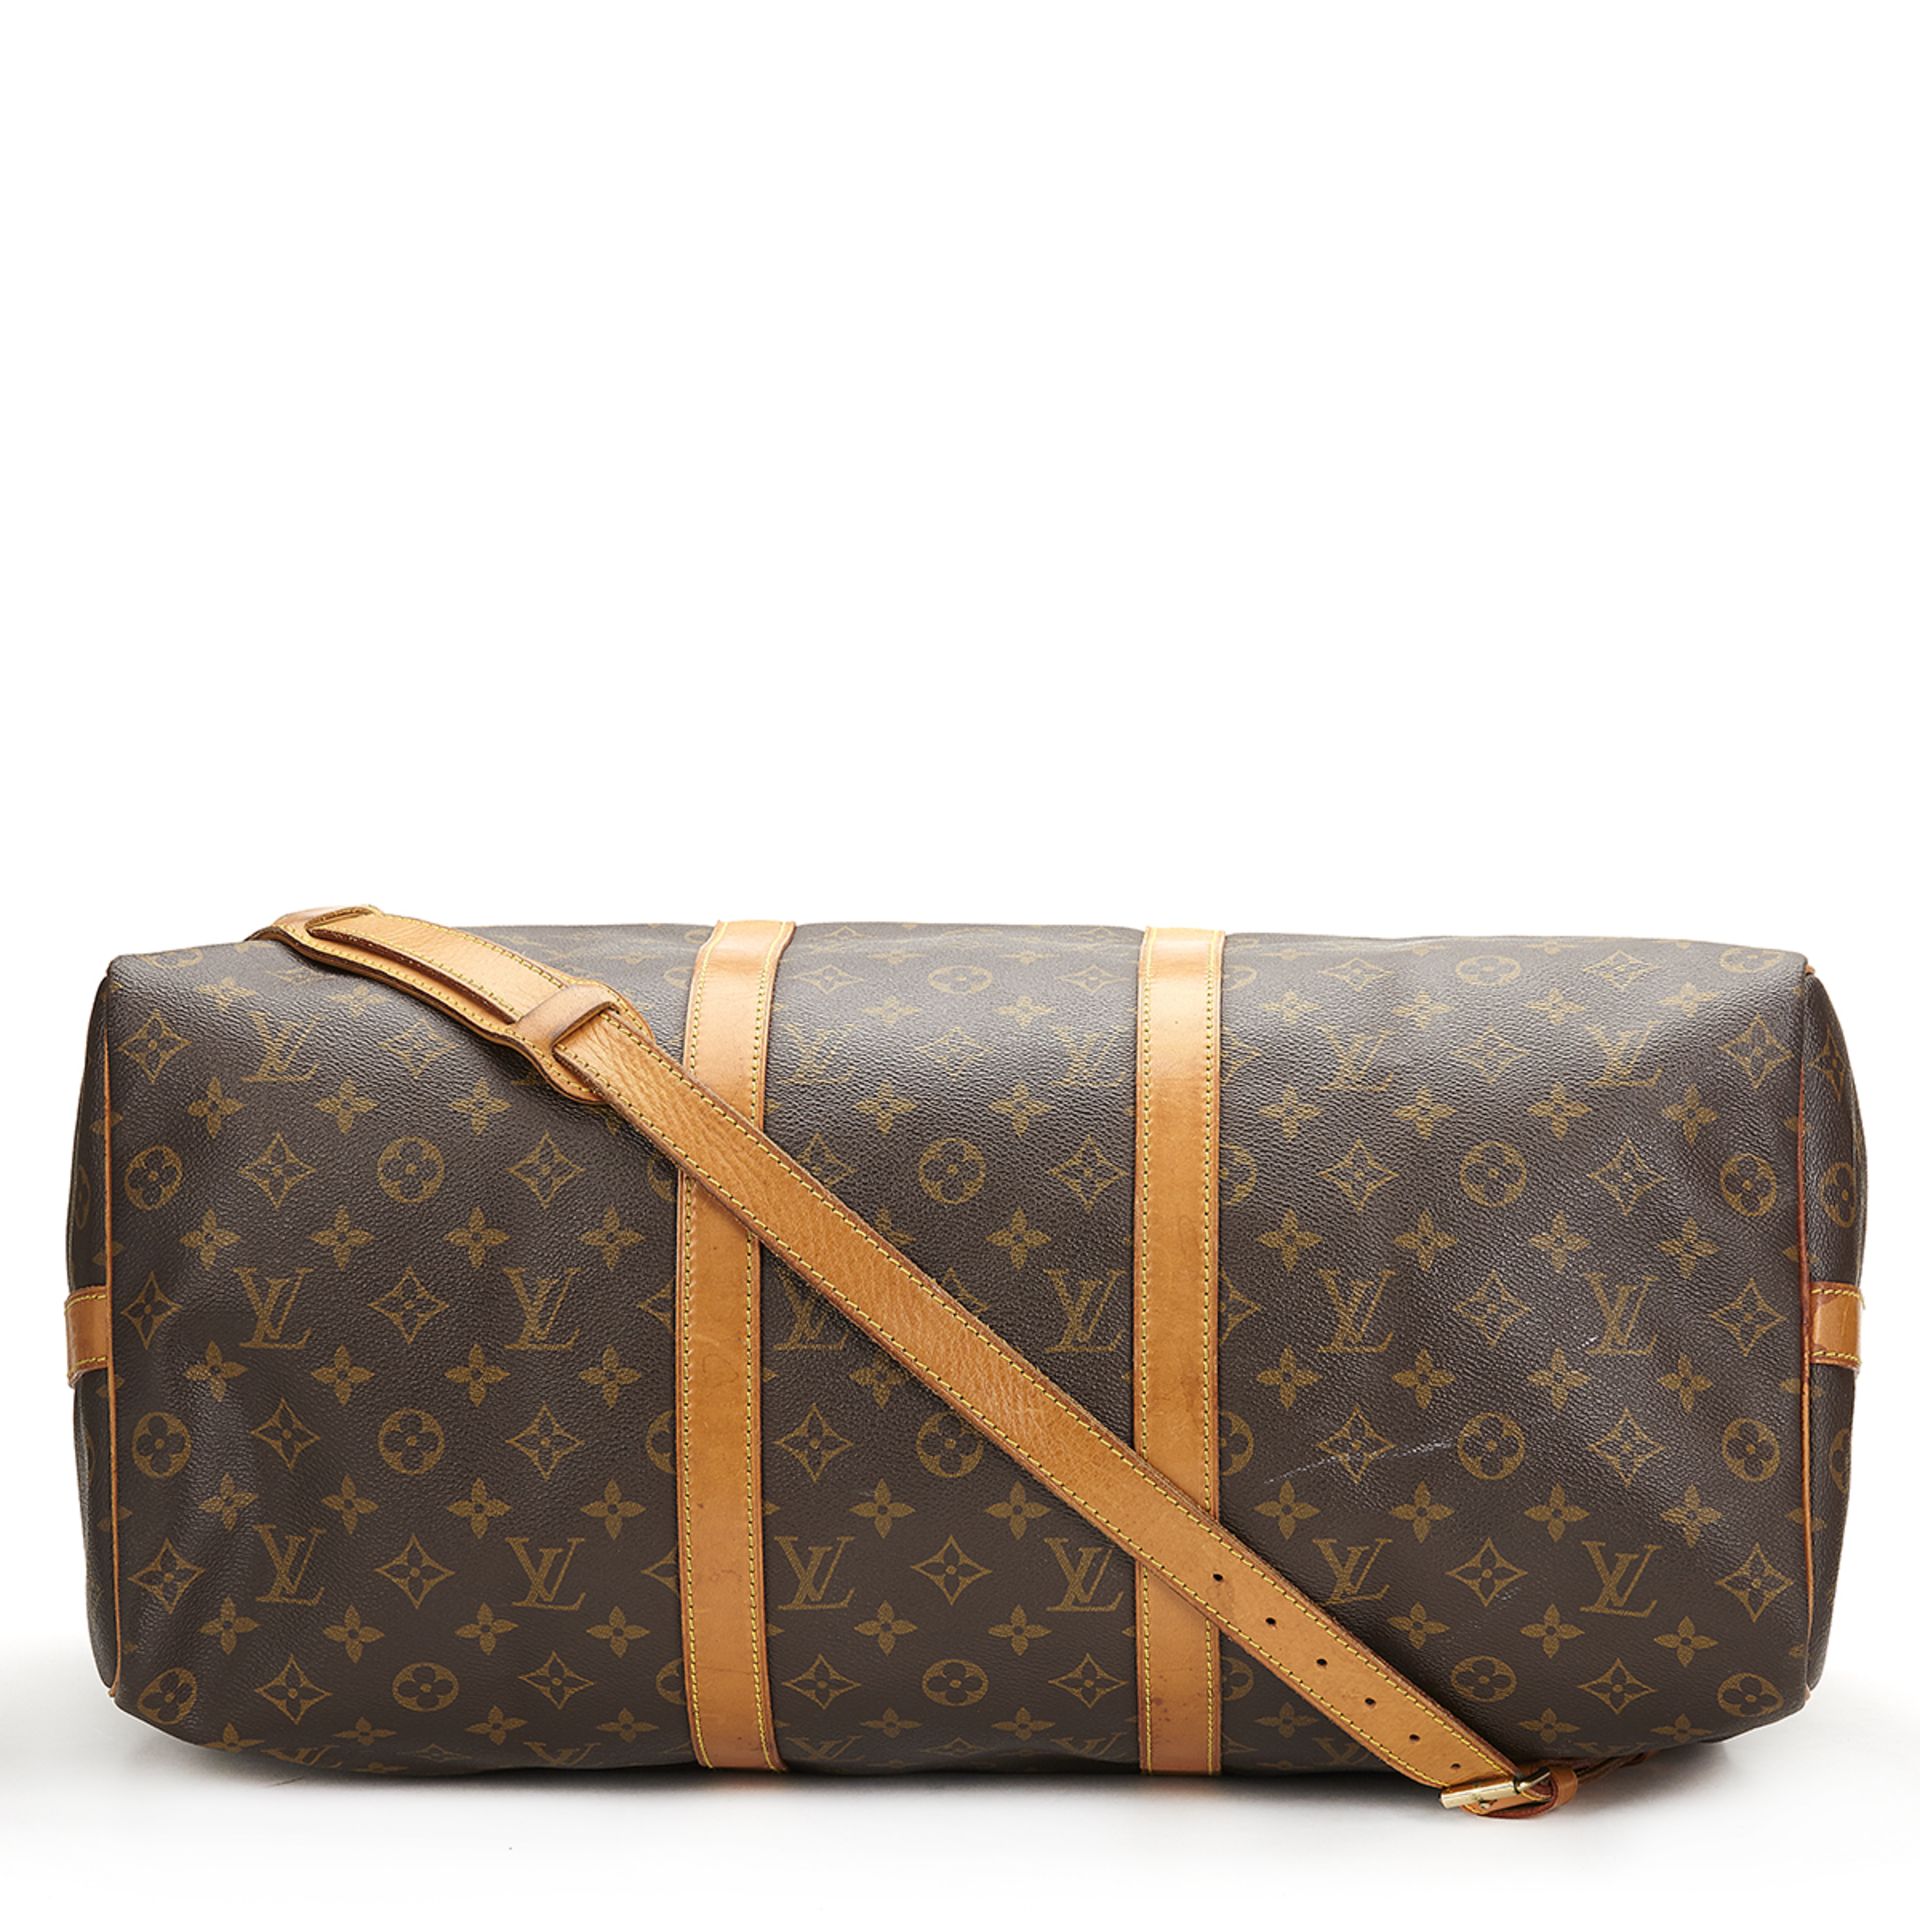 Louis Vuitton, Keepall Bandouliere 50 - Image 5 of 7